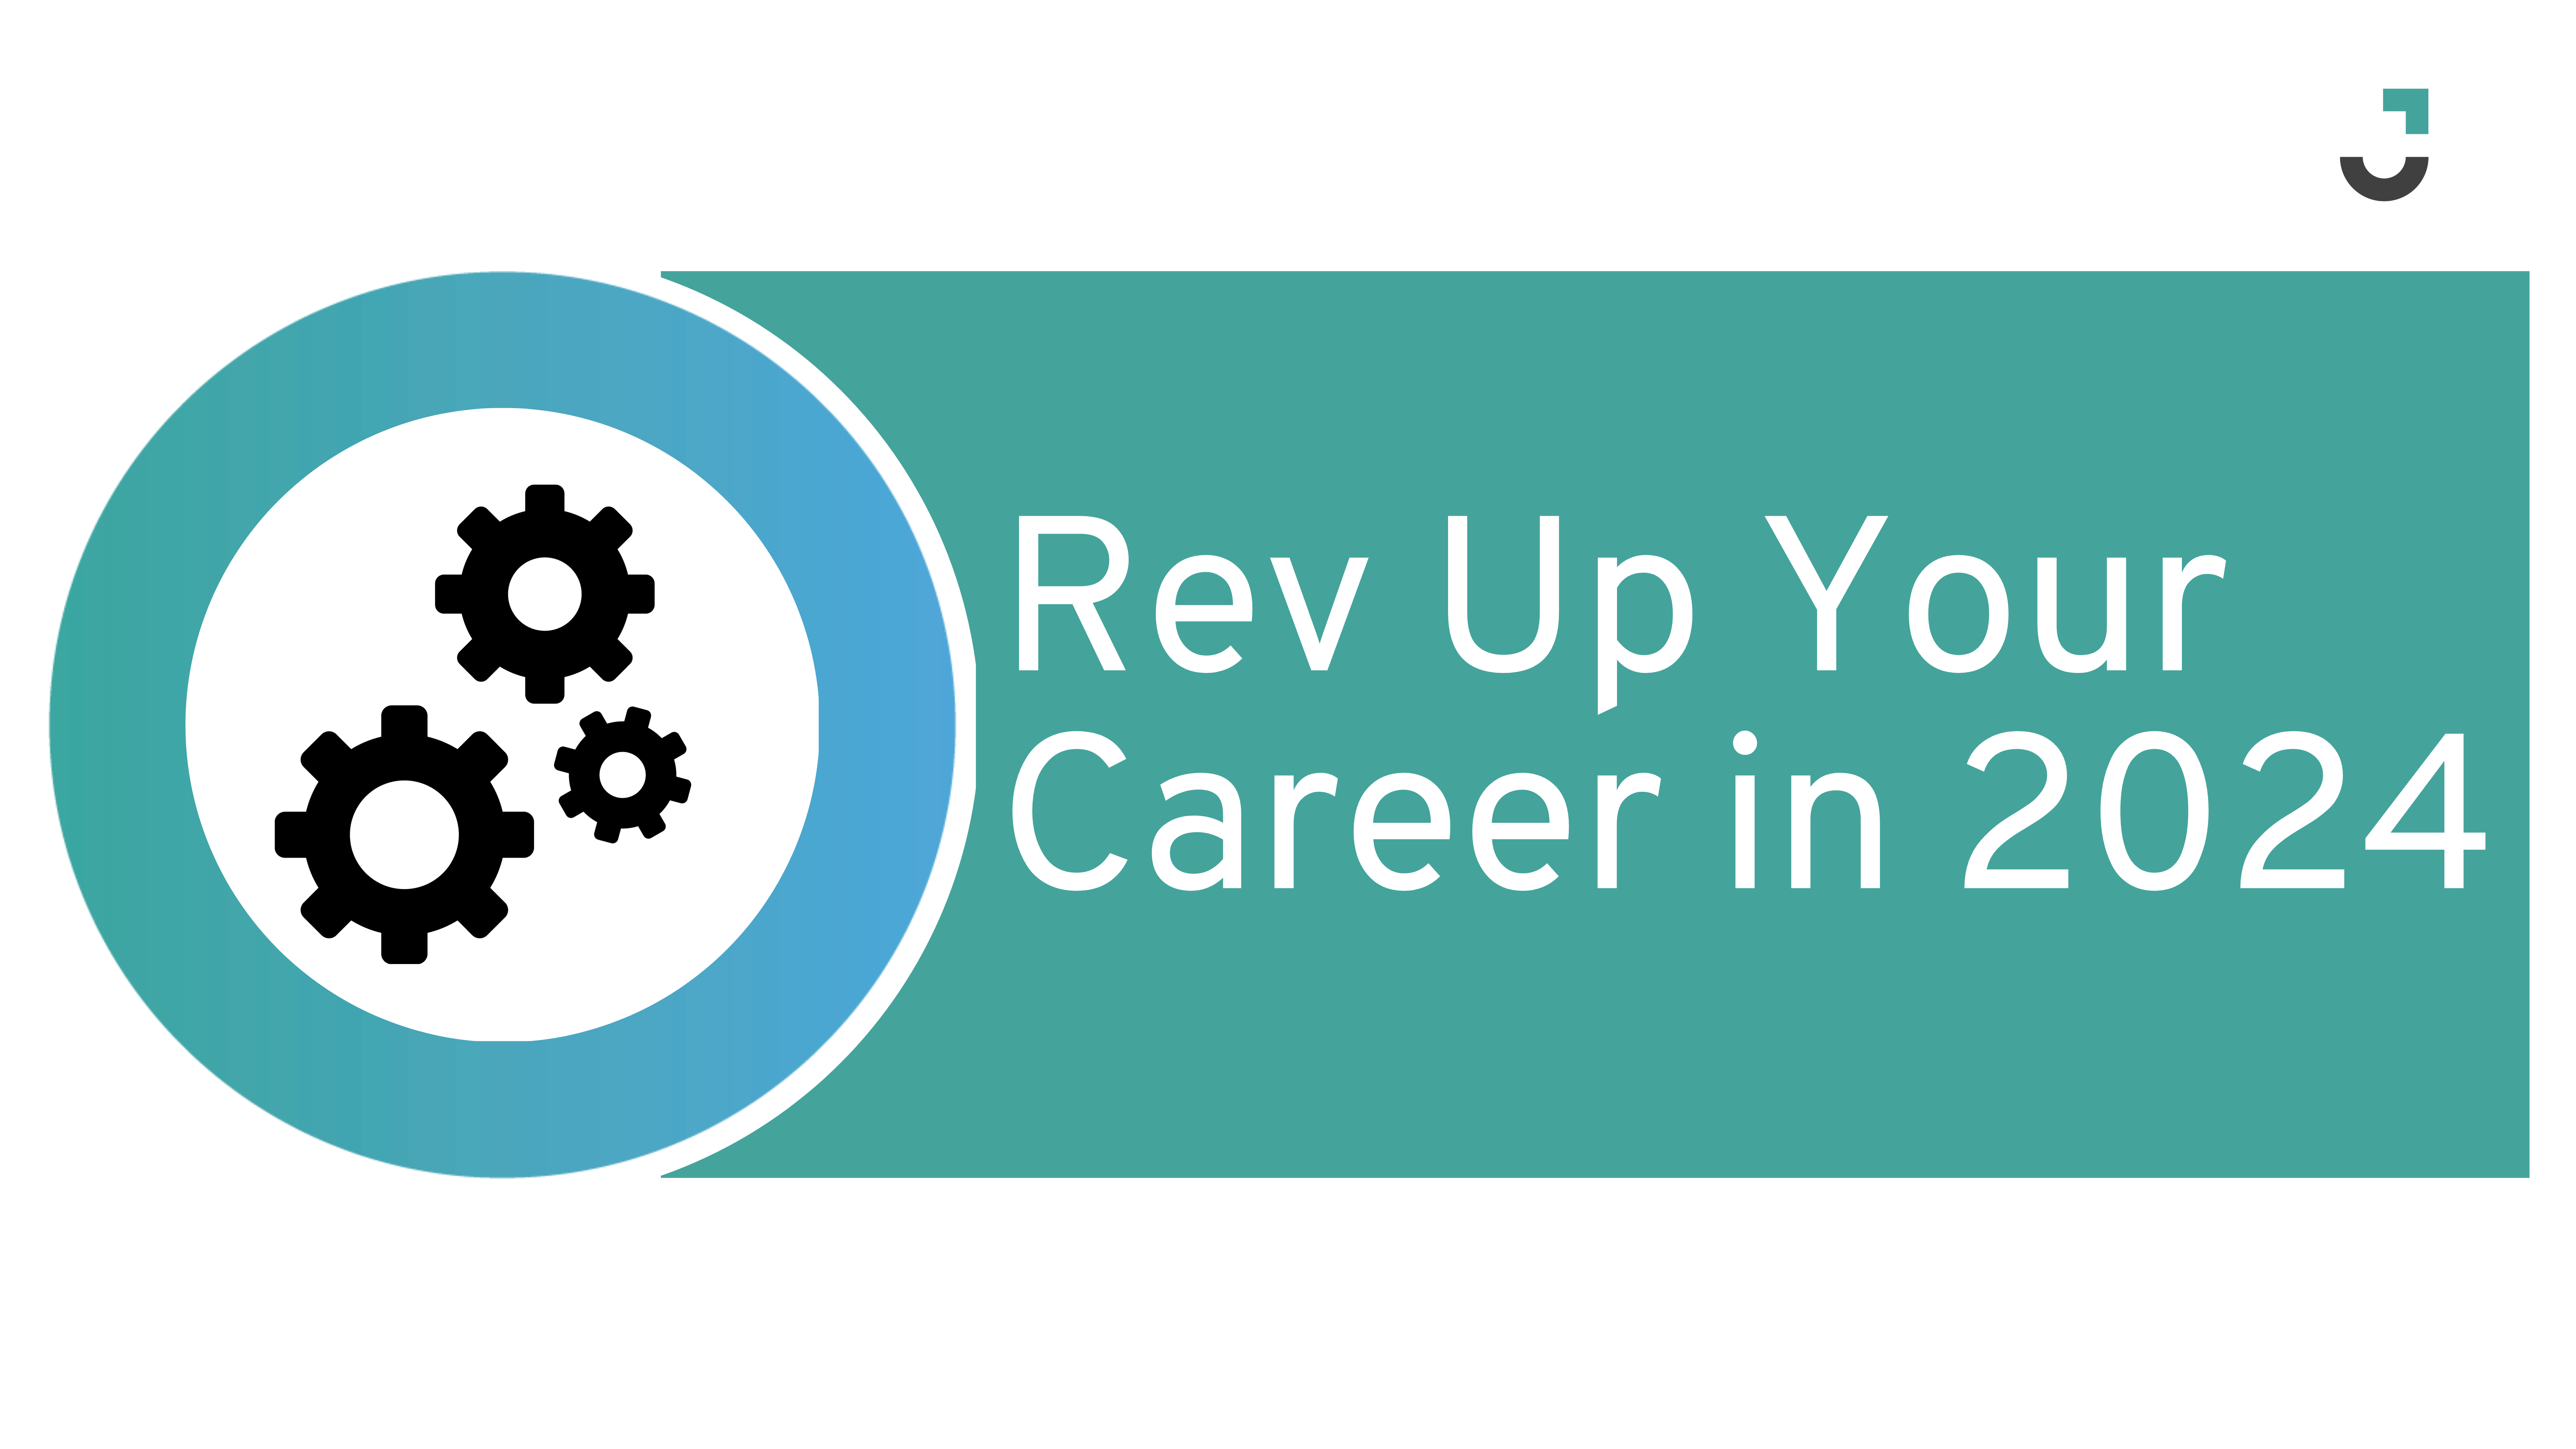 Rev Up Your Career in 2024: Talent Acquisition Trends in the Automotive Industry for Job Seekers